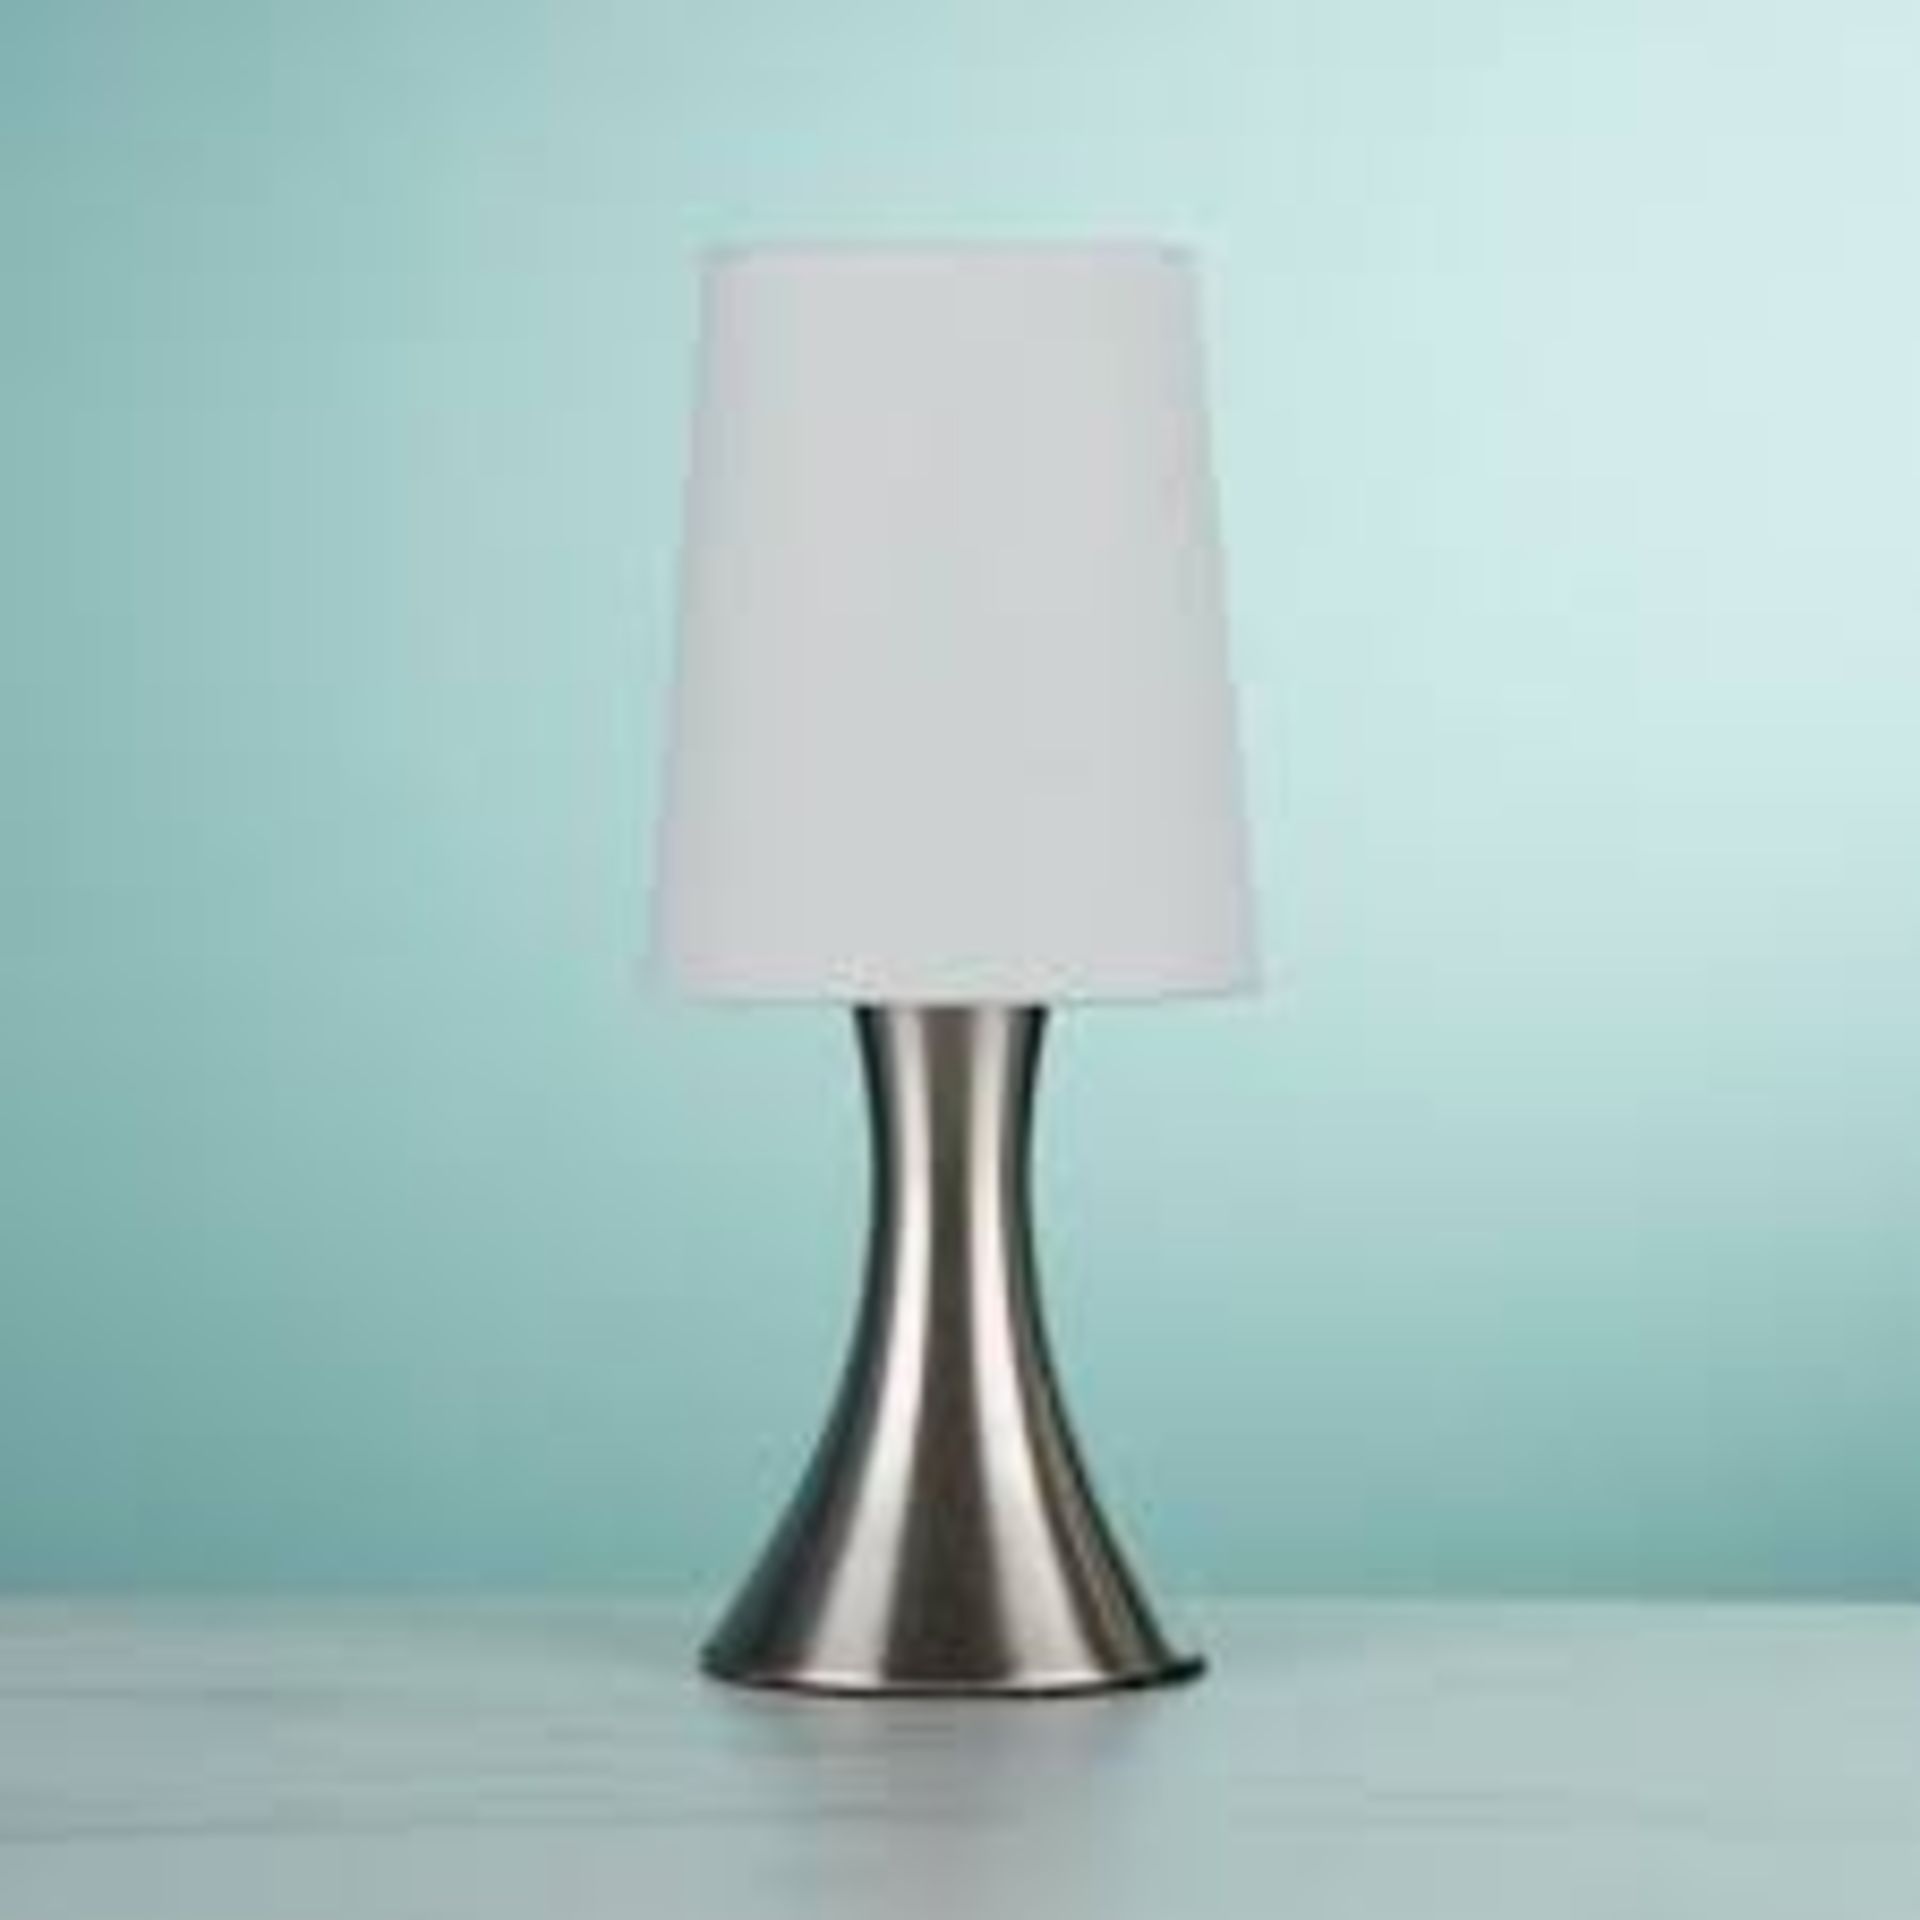 1 x Searchlight Touch Table Lamp in satin silver - Ref: 3922SS - New and Boxed Stock - - Image 3 of 4